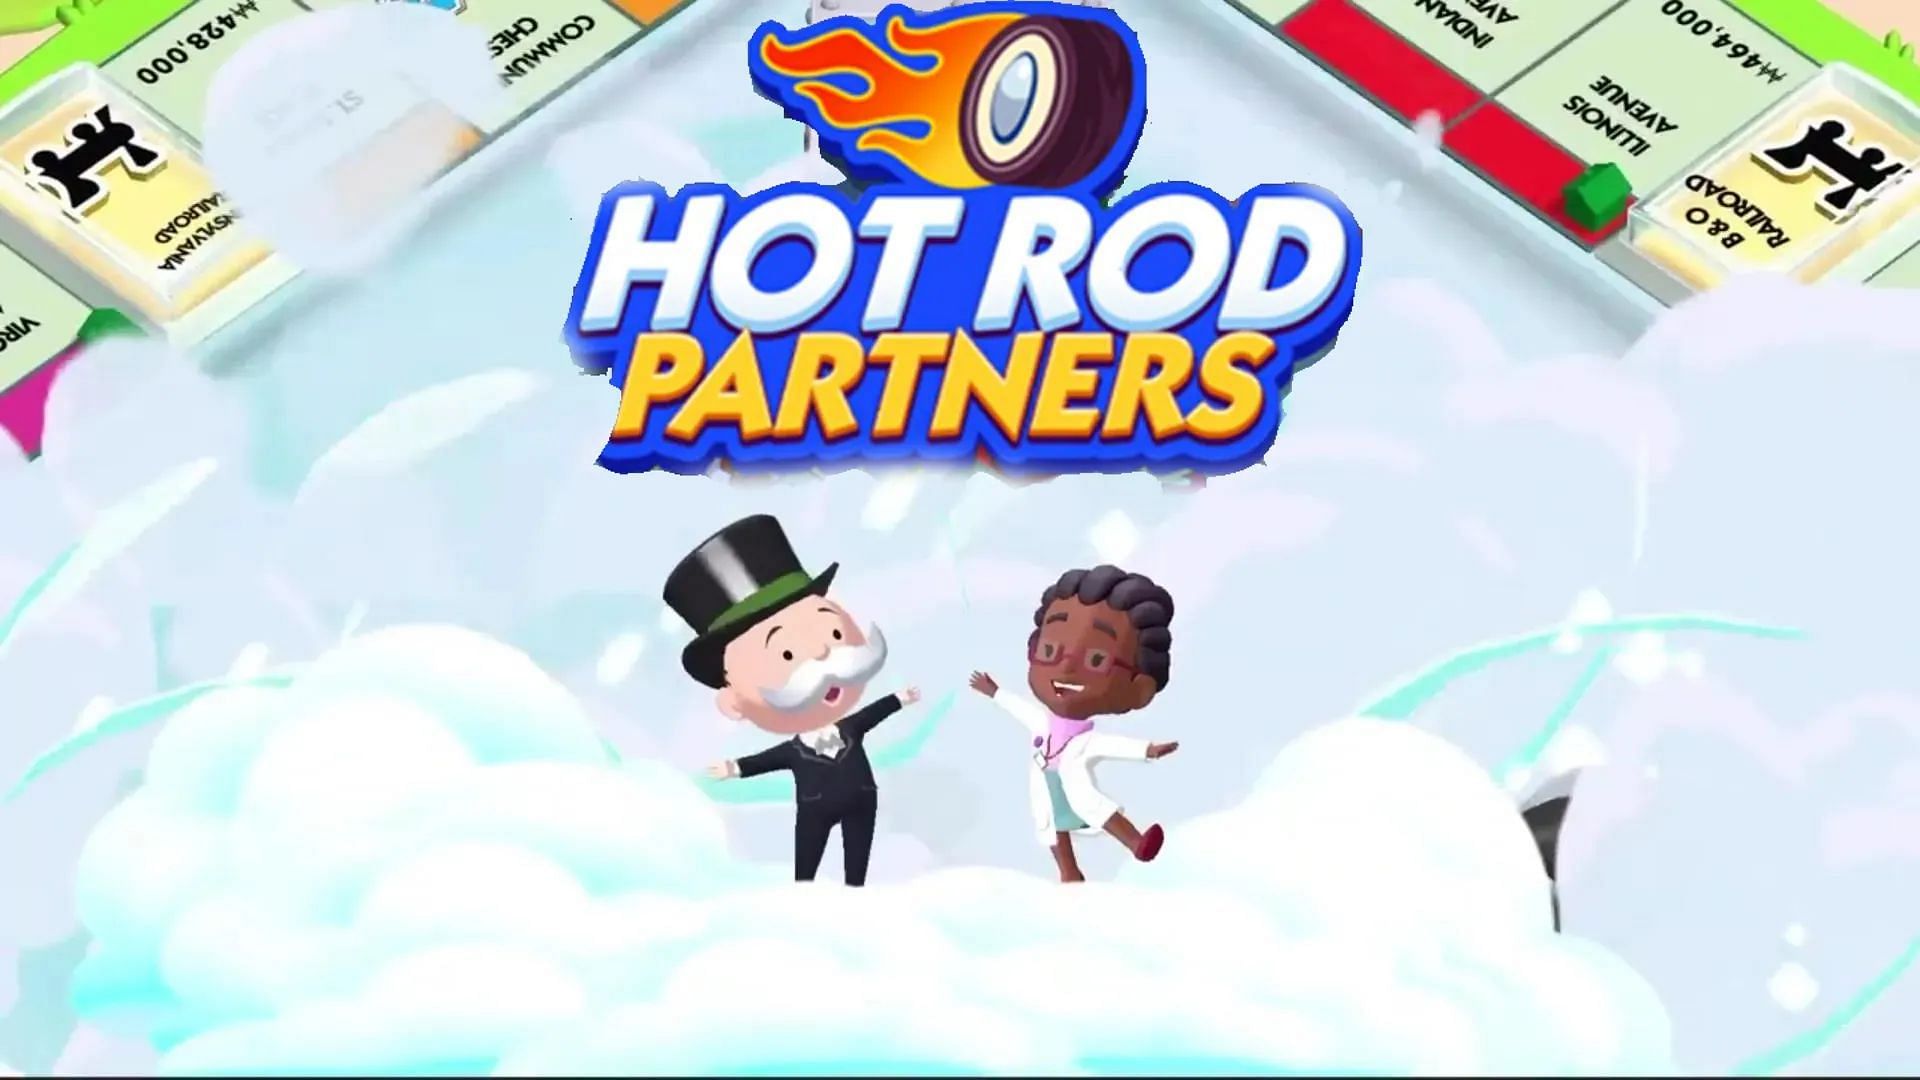 Here is how to get Hot Rod partners tokens (Image via Scopely)